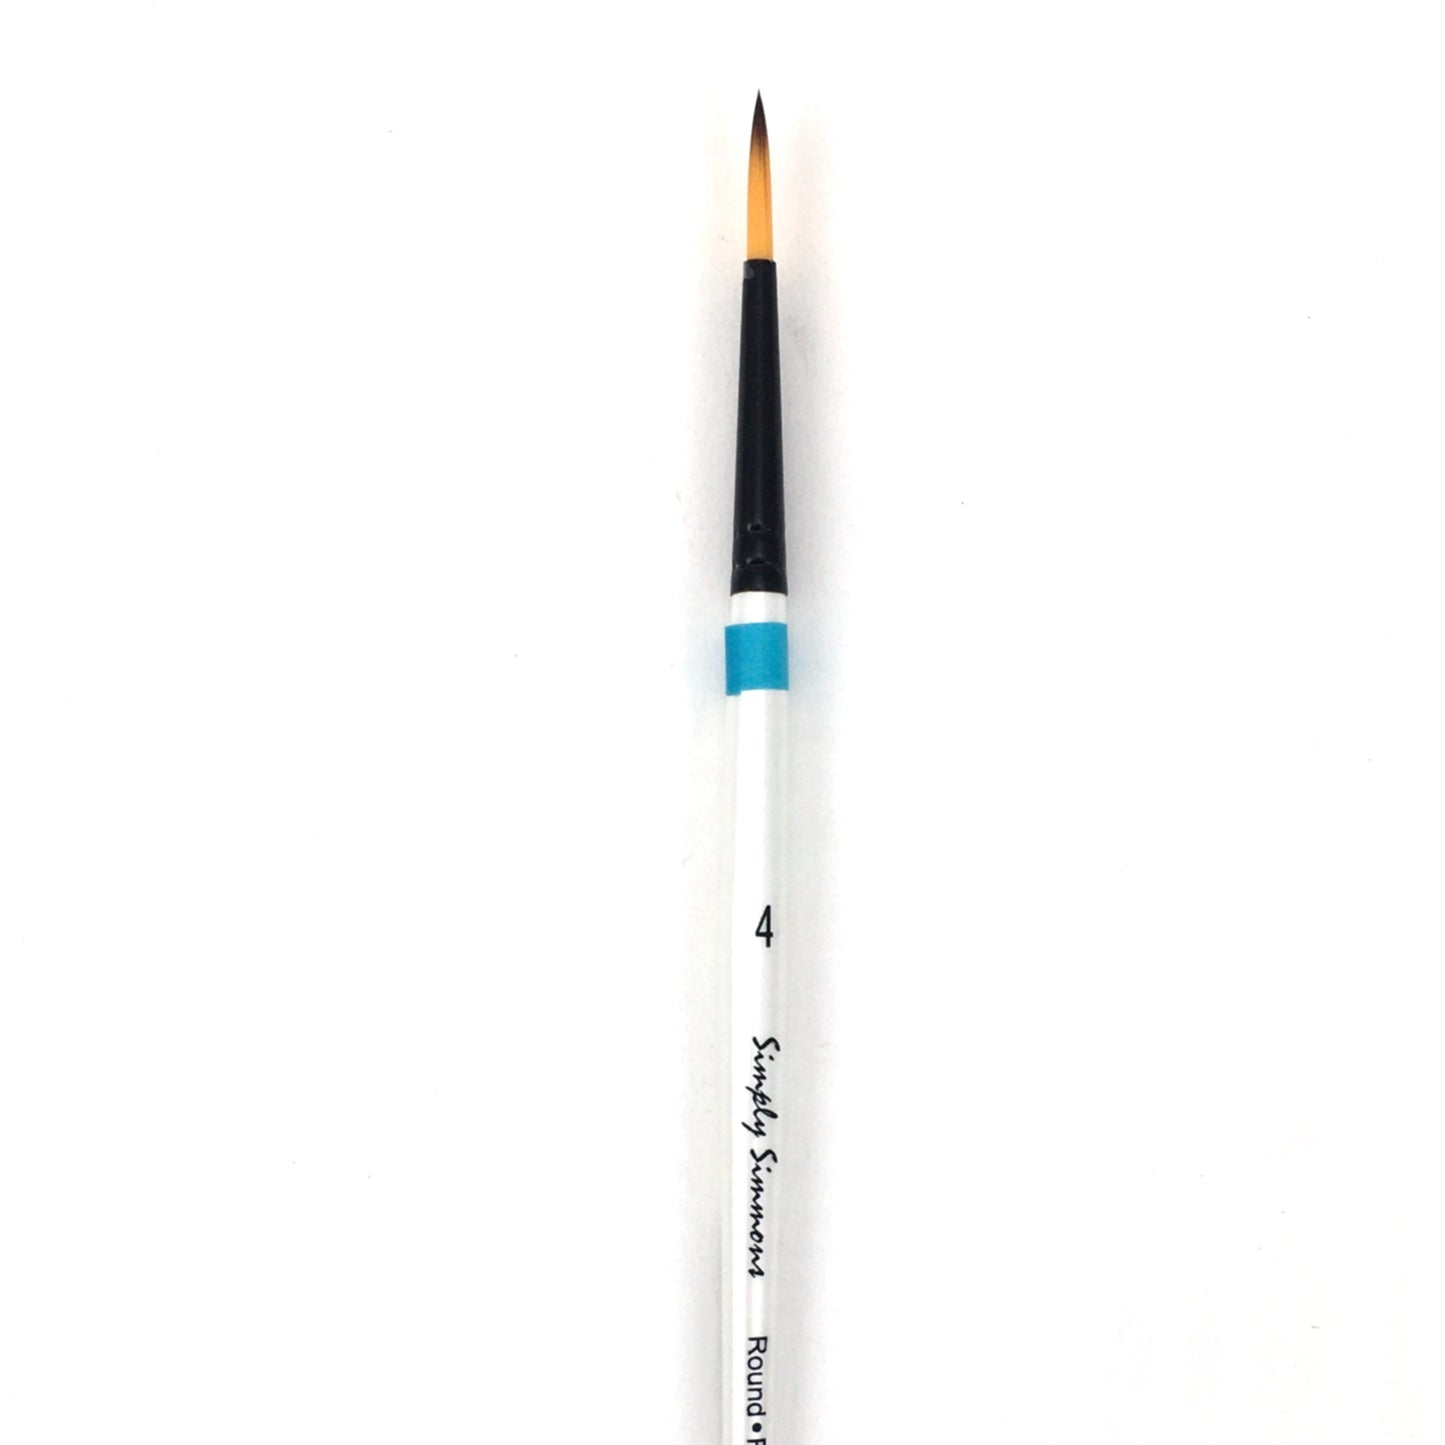 Simply Simmons Watercolor Brush - Short Handle - Round / - #4 / - synthetic by Robert Simmons - K. A. Artist Shop